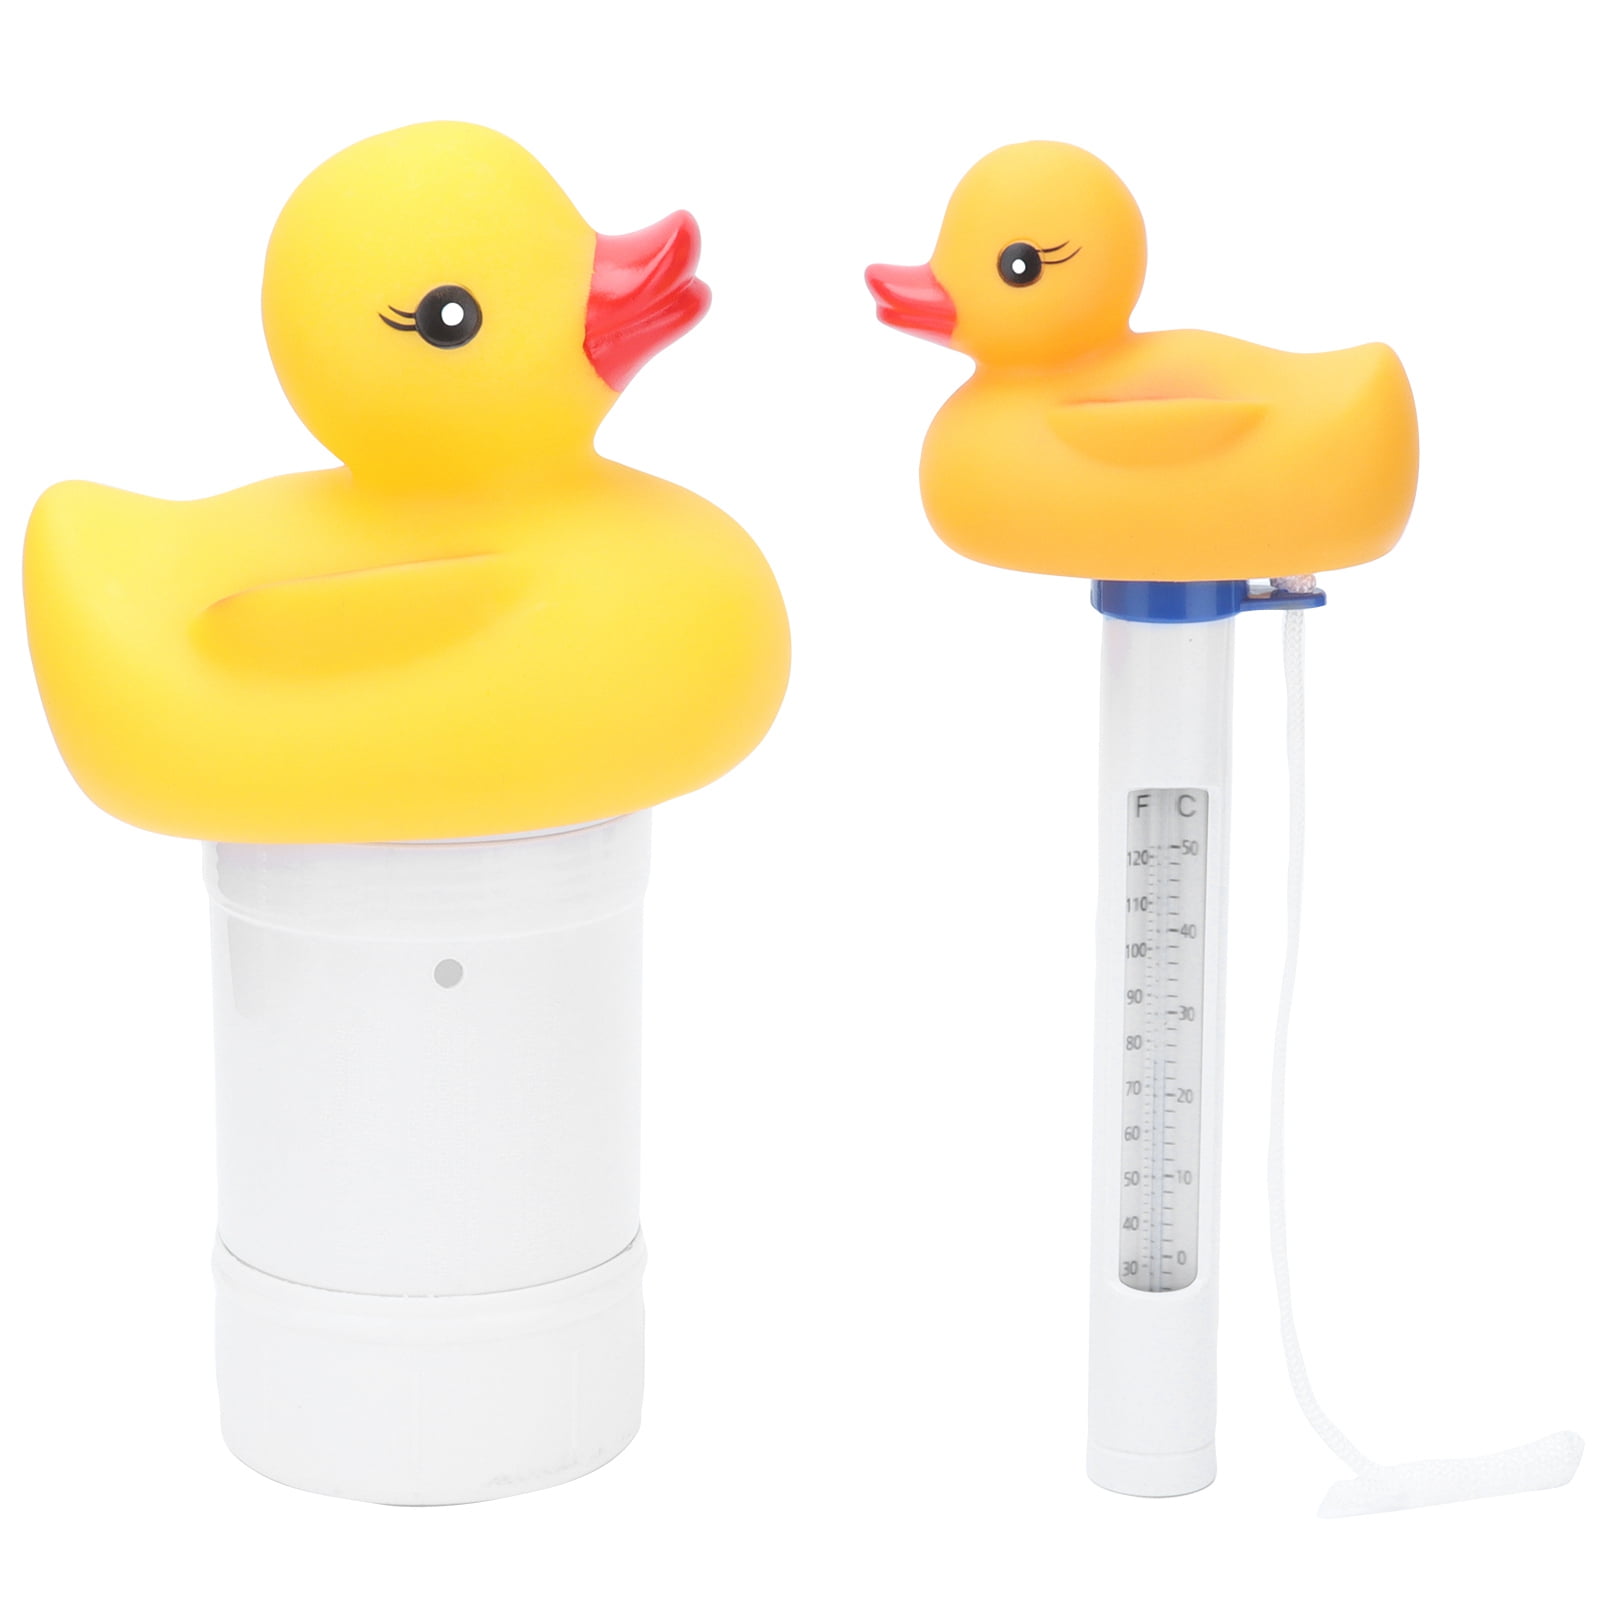 2pcs Floating Thermometer For Swimming Pool Pond Hot Tub Water Duck Fish Useful